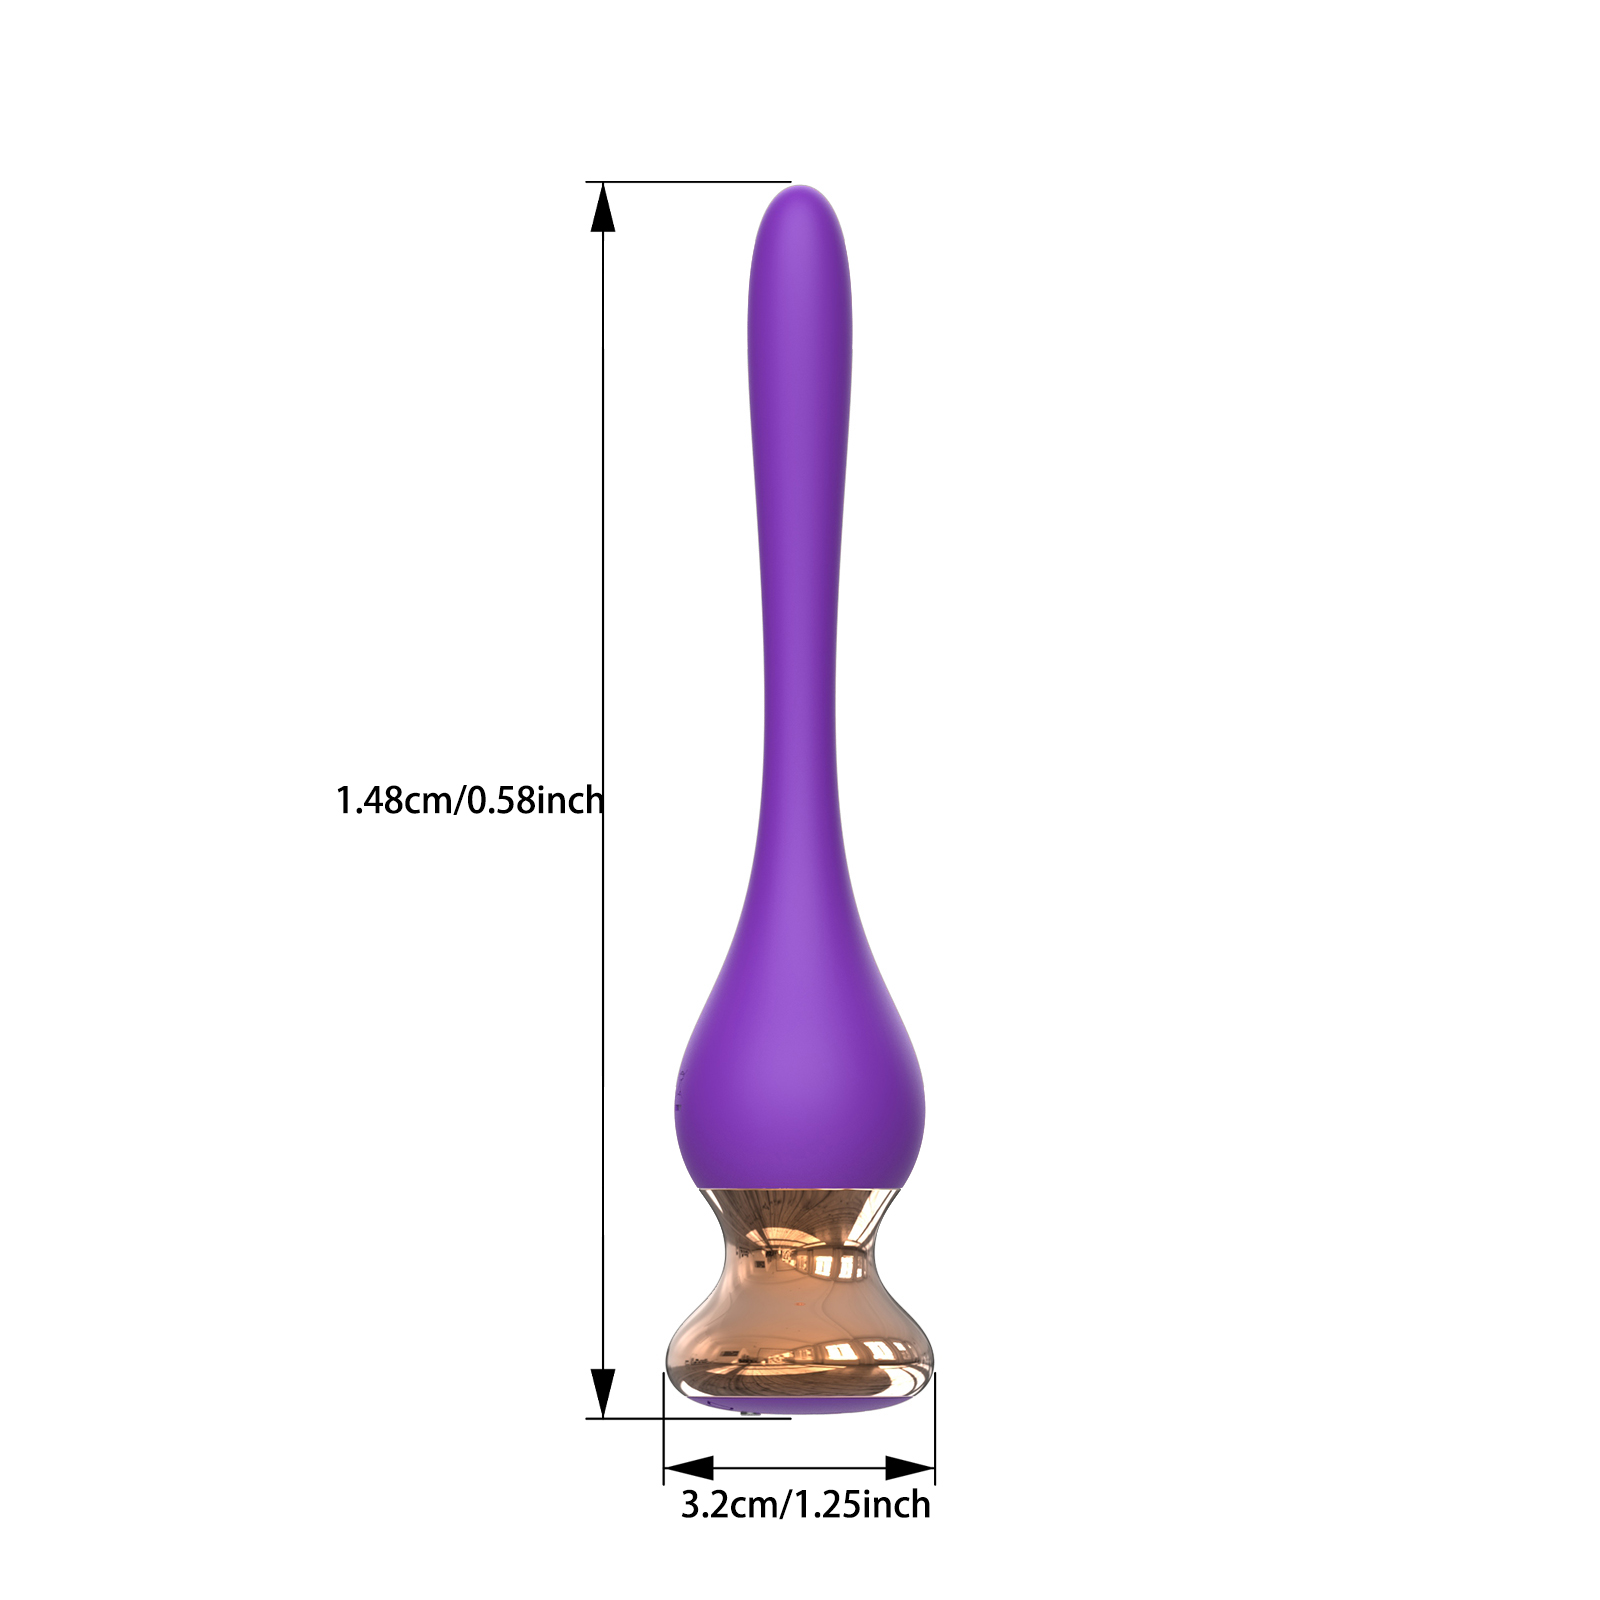 A penis vibrator is a specialized sex toy designed to provide enhanced stimulation and pleasure to the penis.